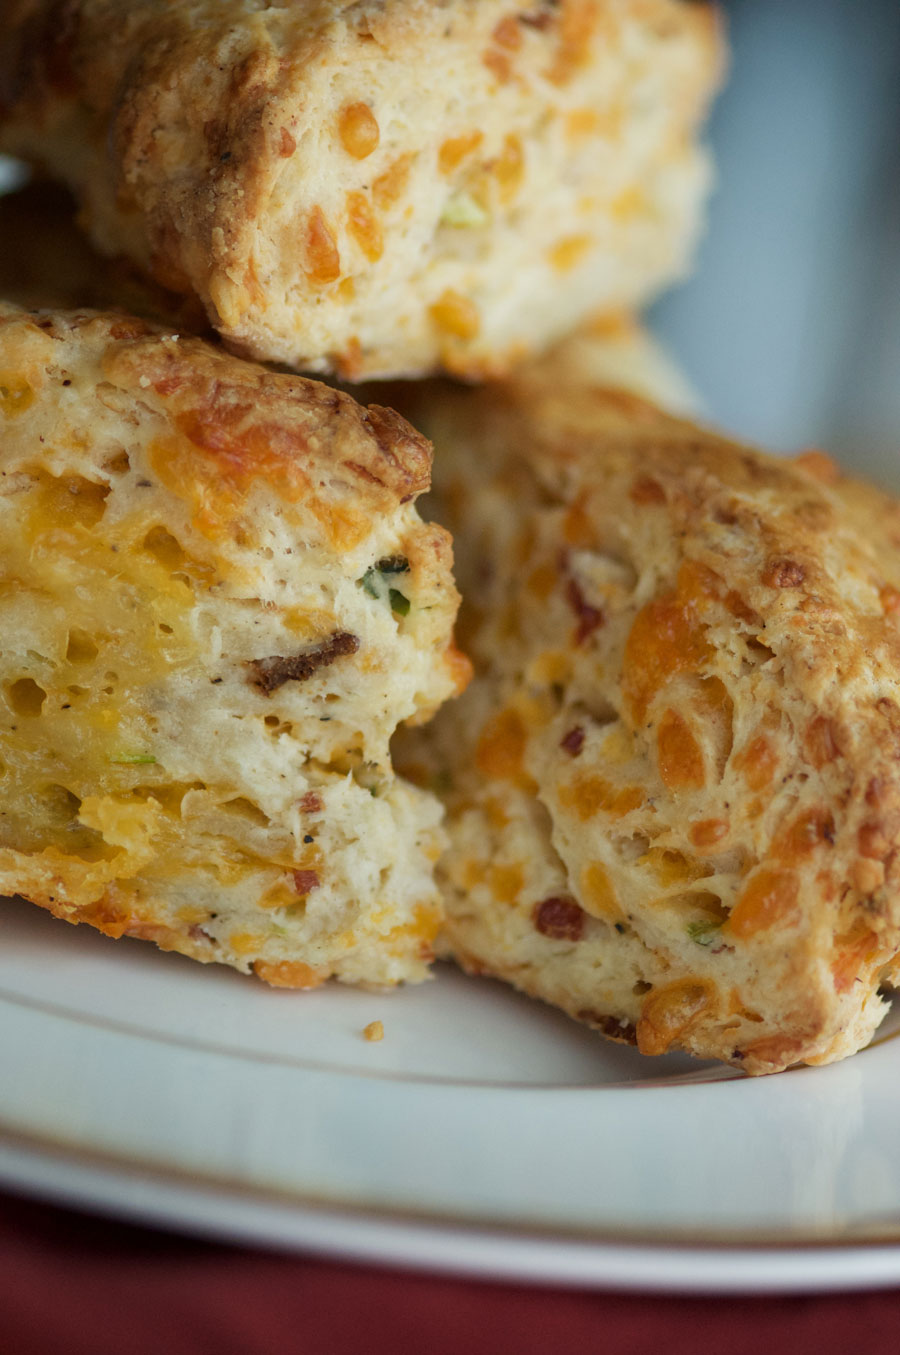 Cheddar bacon scones, warm from the oven